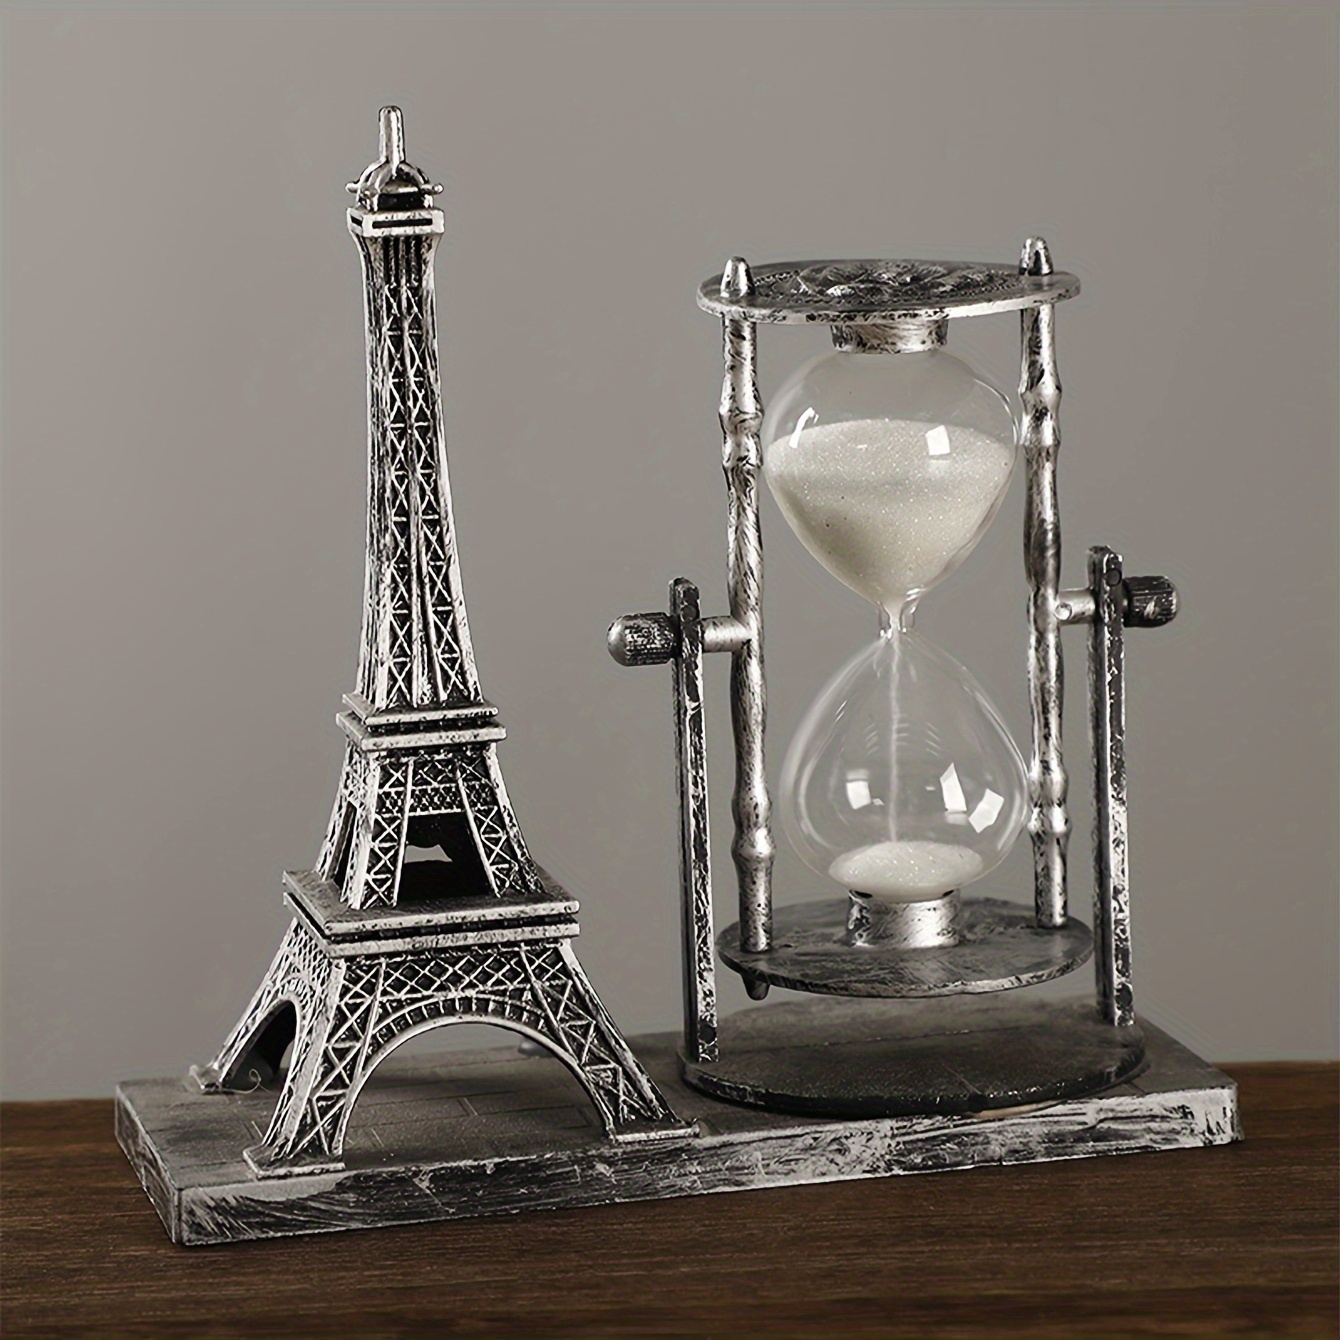 

Vintage Eiffel Tower Style Silver Hourglass Decoration, 1-piece, Ideal For Office, Bar Cabinet, Dining Table Decor, Perfect As A Gift, No Electricity Required For Operation